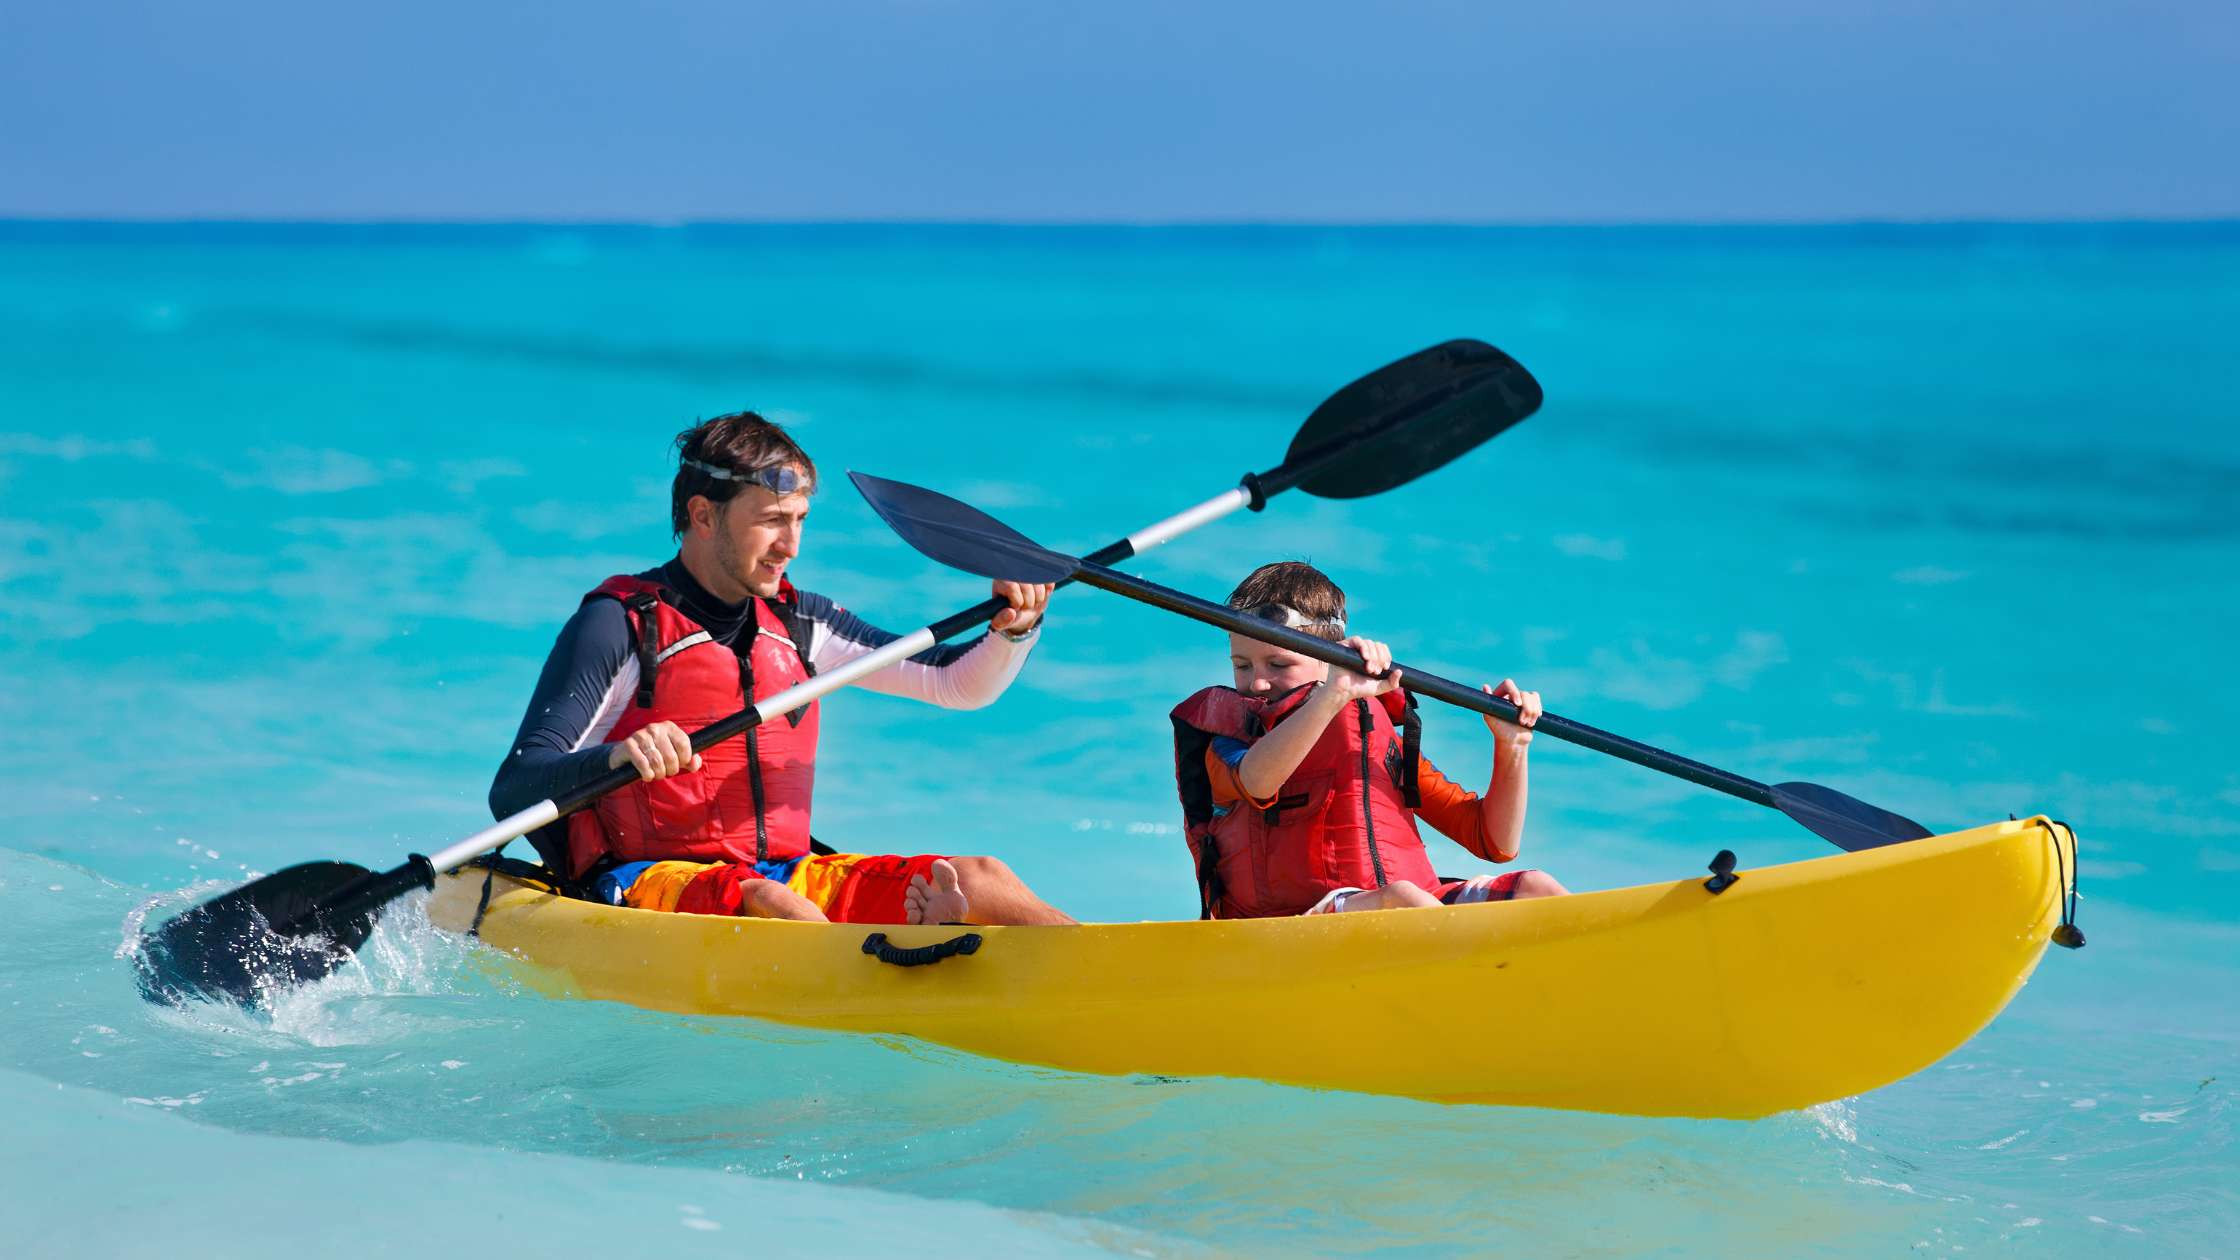 Do You Need to Be a Swimmer to Enjoy Kayak?